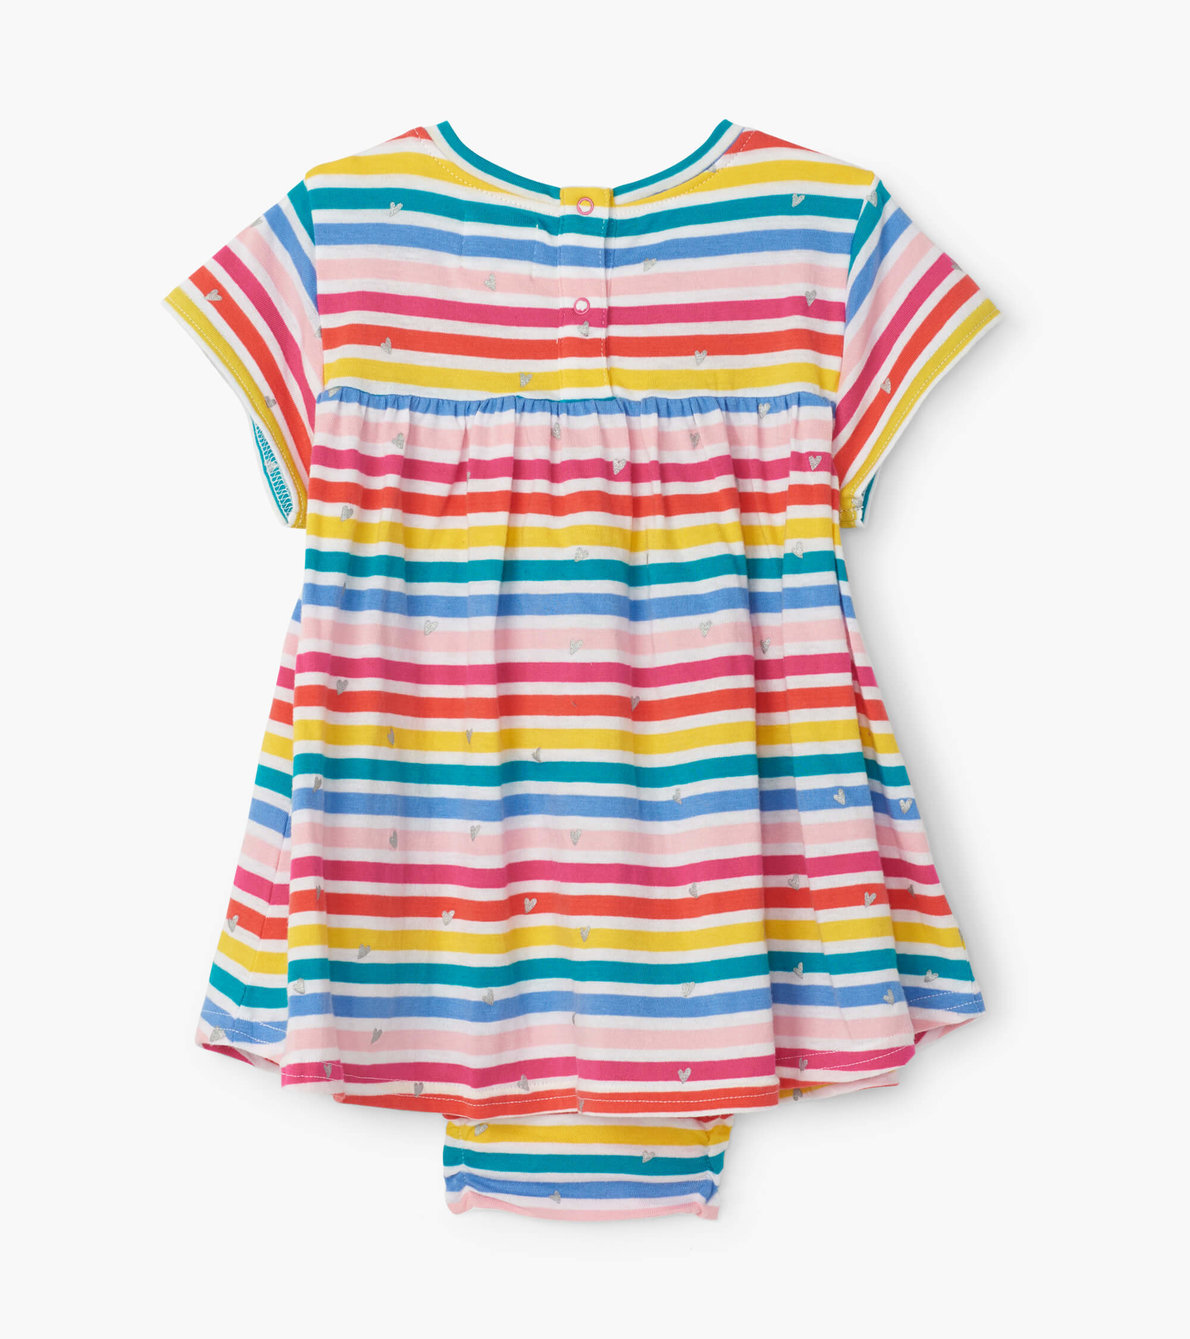 View larger image of Rainbow Stripe Baby One-Piece Dress